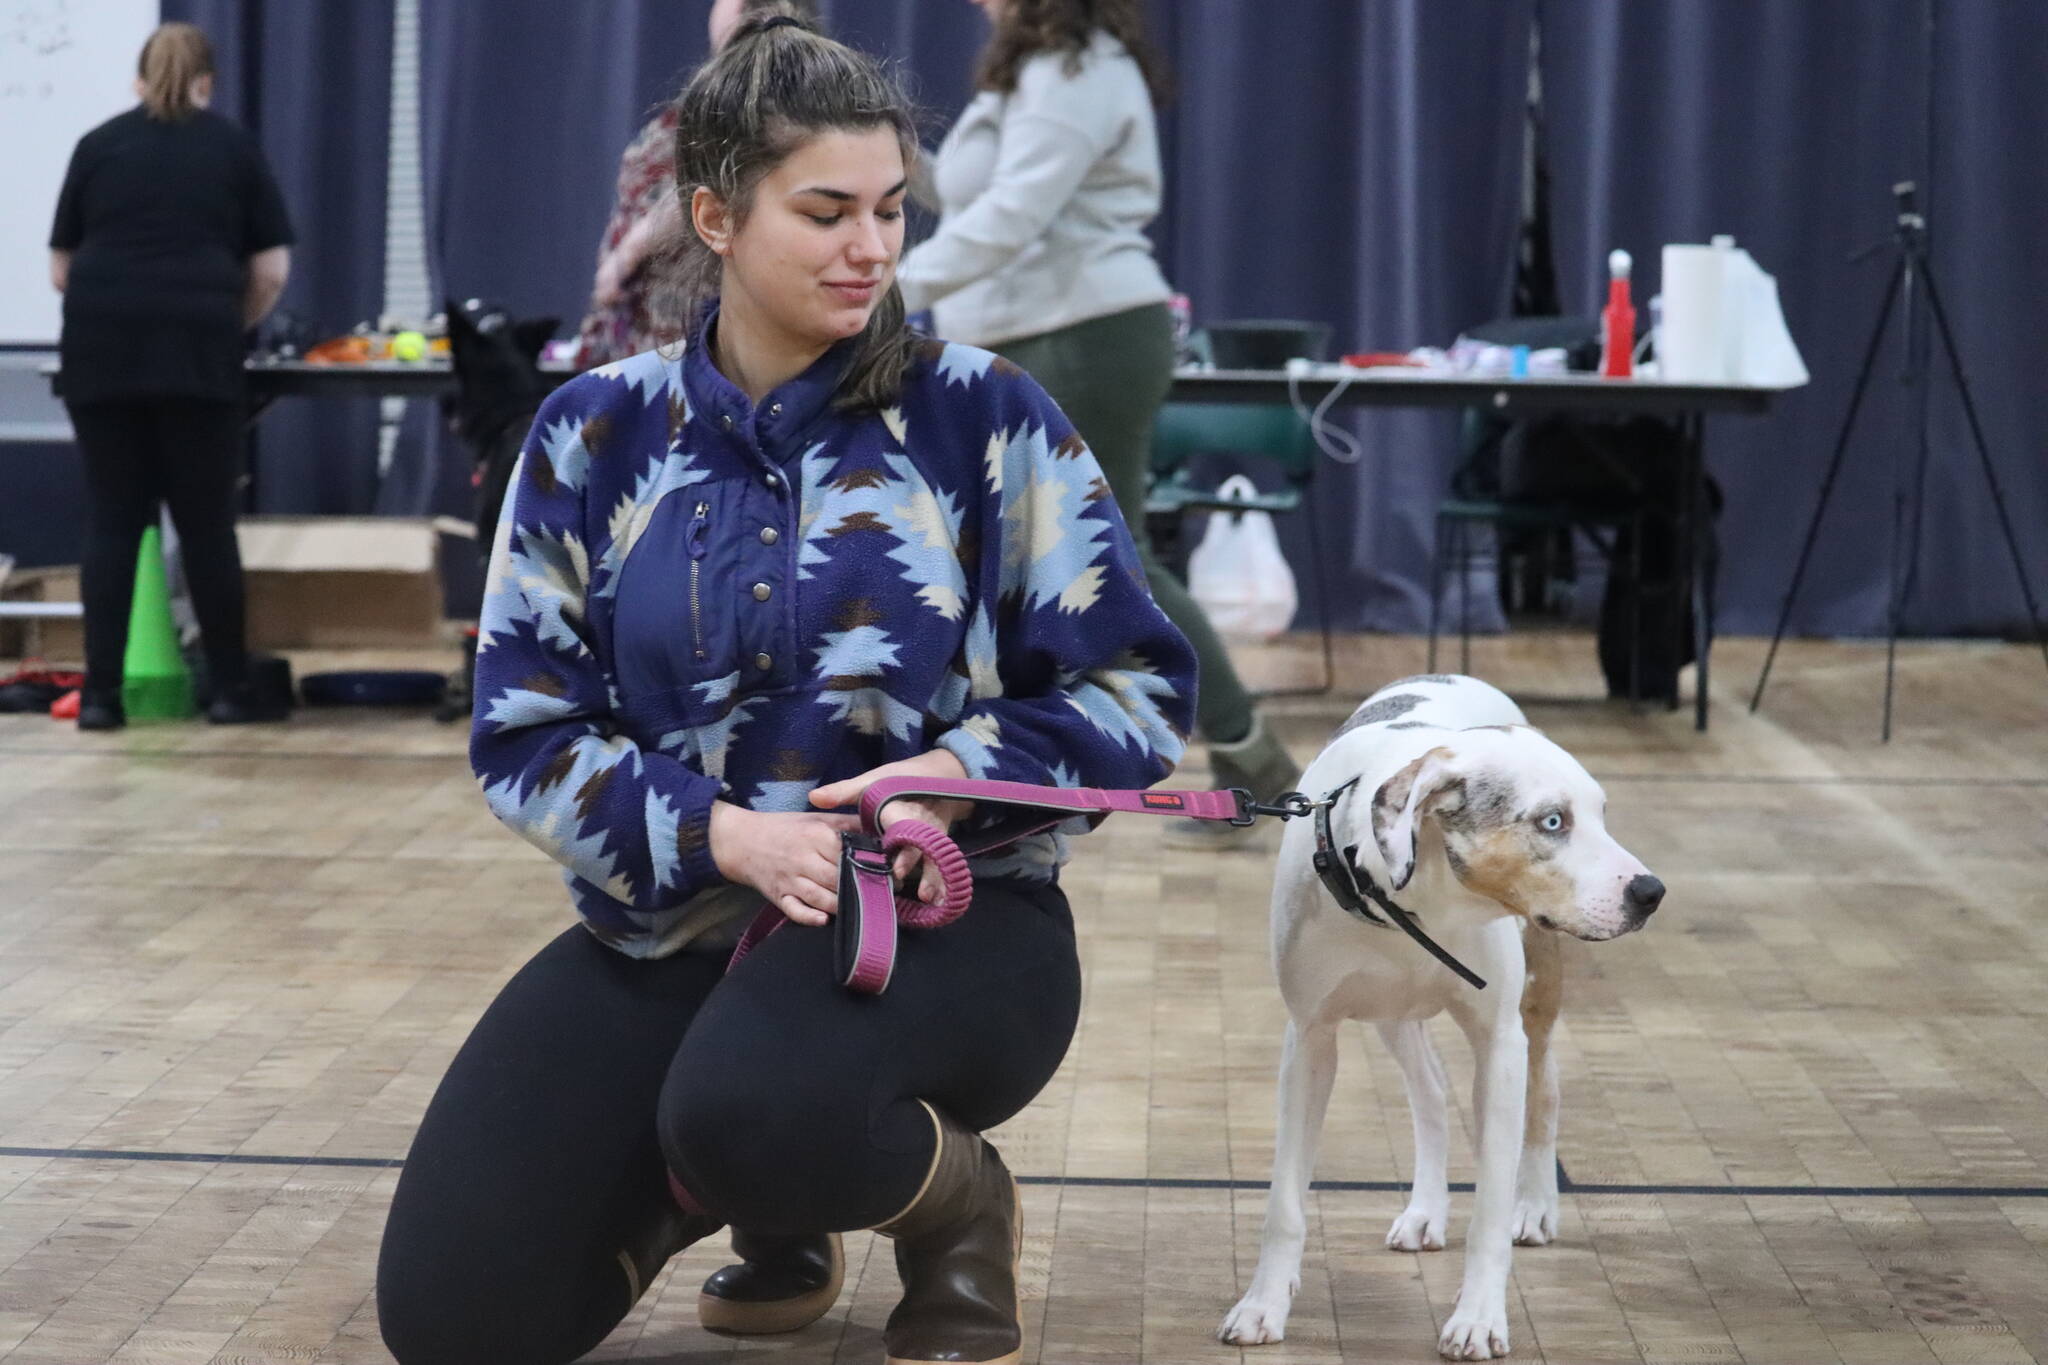 CC, 1, with owner Miranda Guizio attend Saturday’s No Bad Dog Class at the Juneau Arts and Culture Center to help with CC’s anxiety around other people and dogs. (Jonson Kuhn / Juneau Empire)